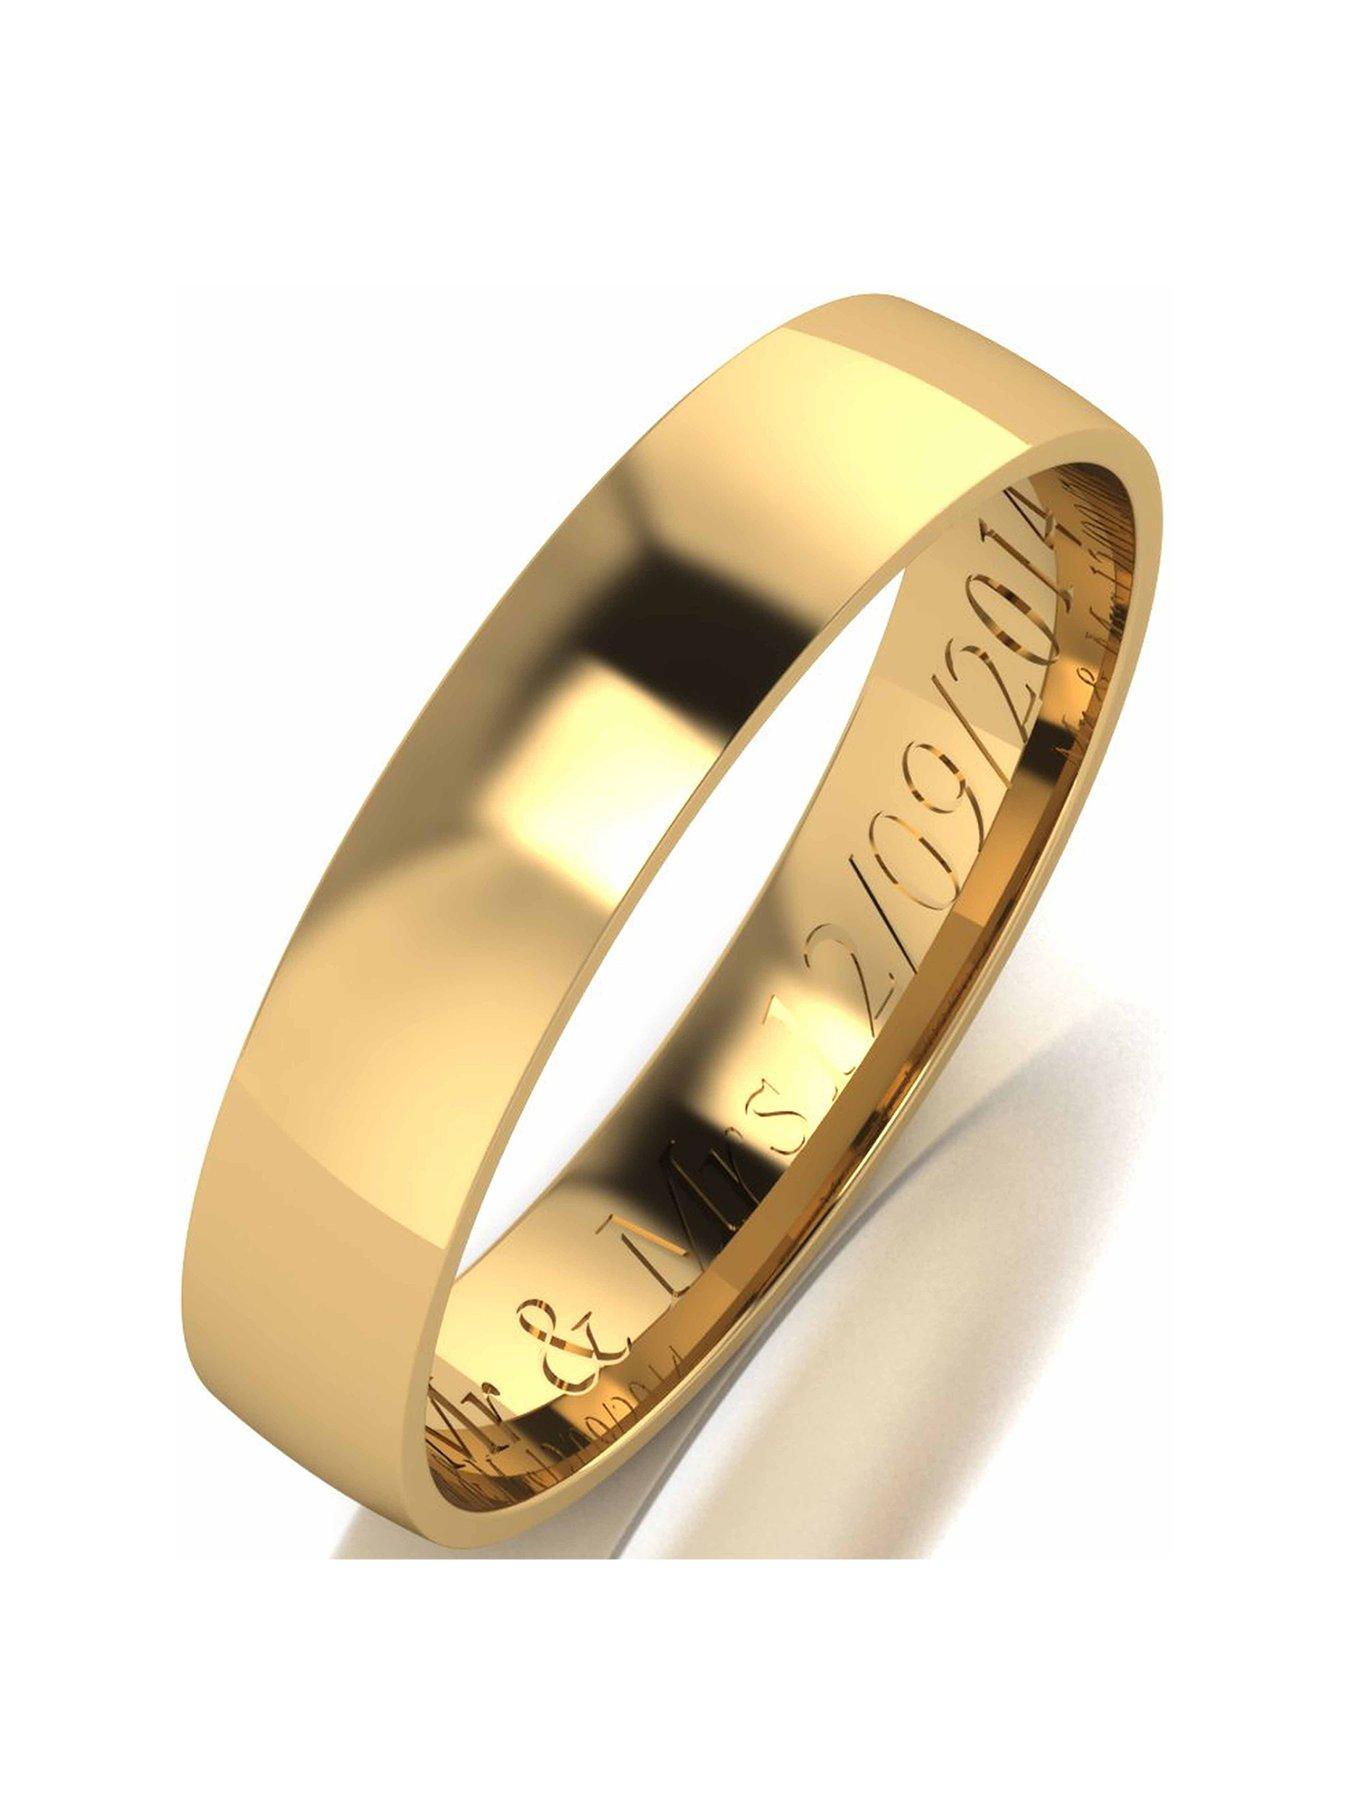 Millgrain Patterned Wedding Ring 9ct Yellow Gold Band Heavy All Sizes and Widths